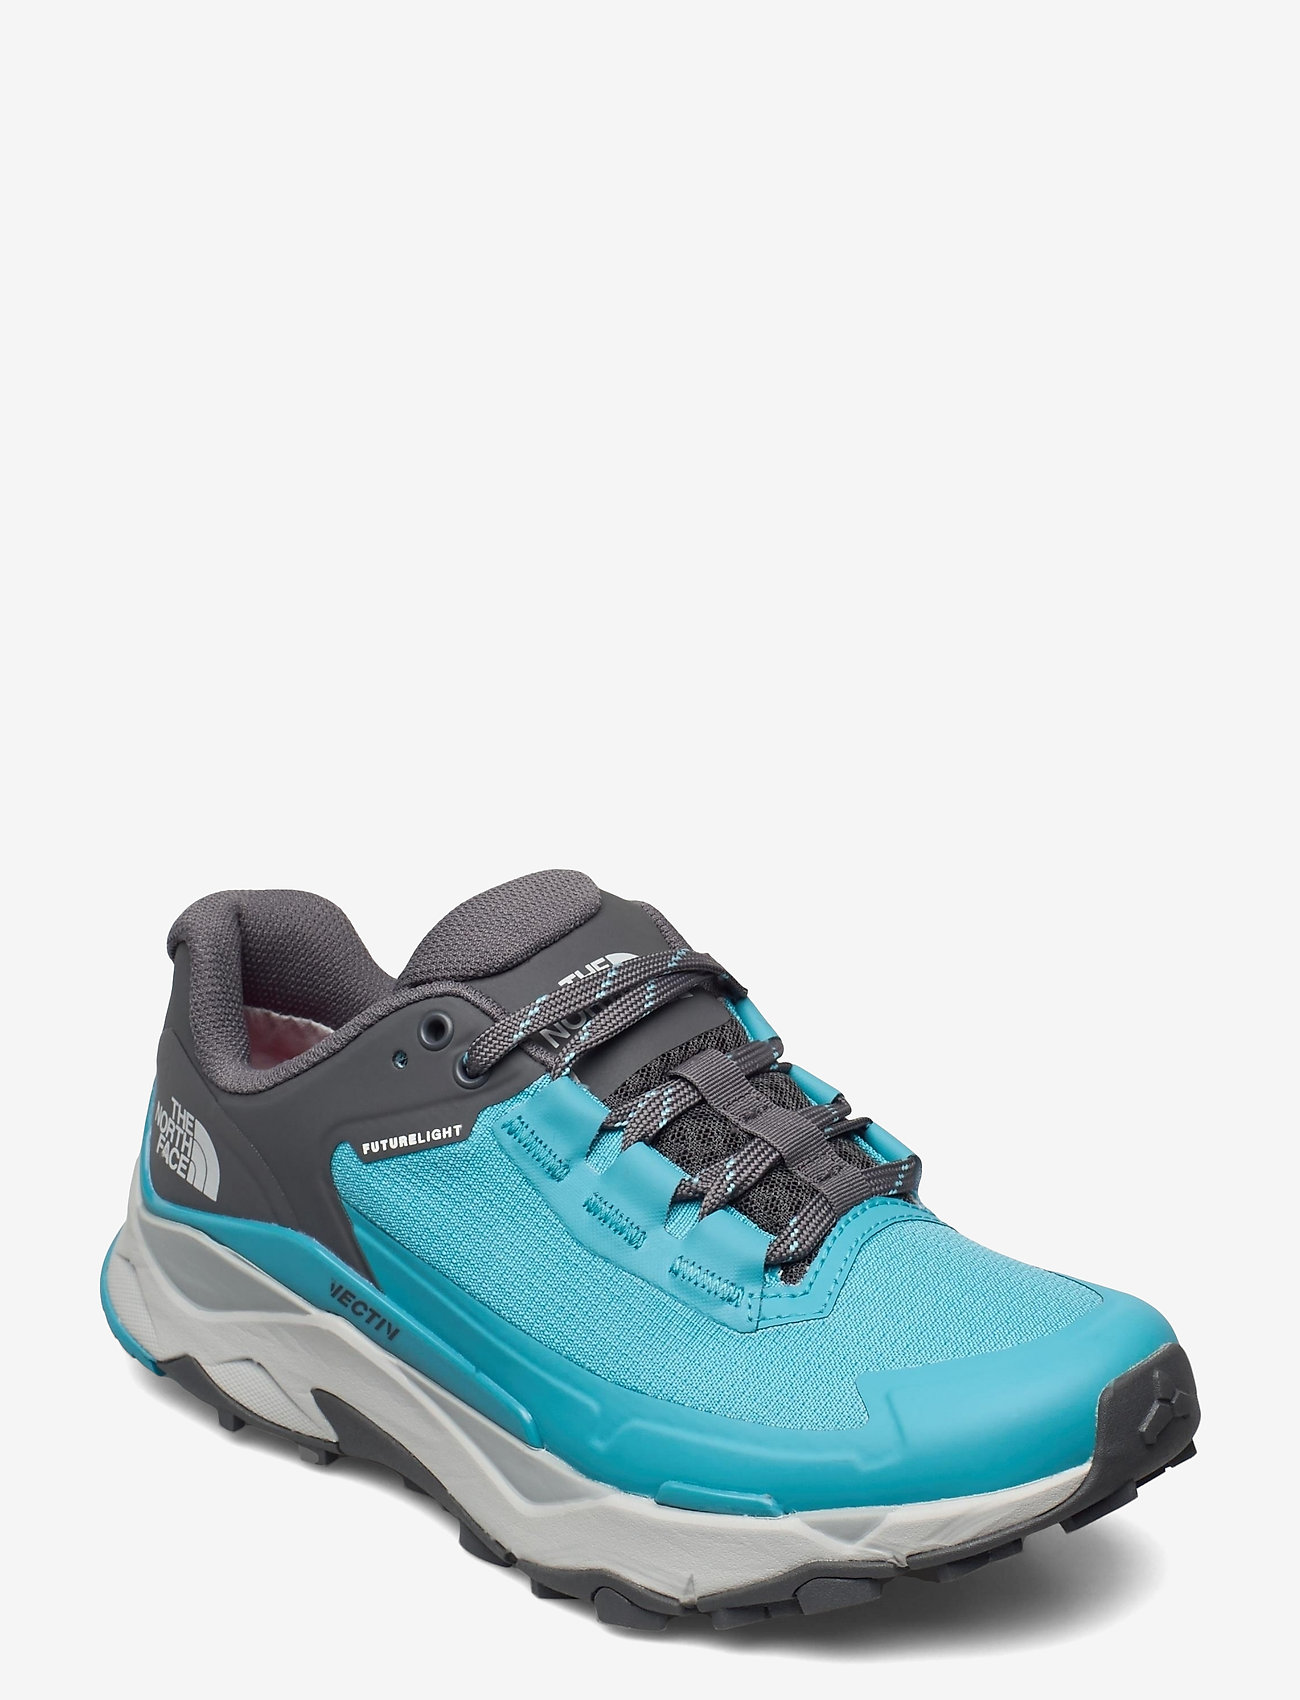 north face sport shoes